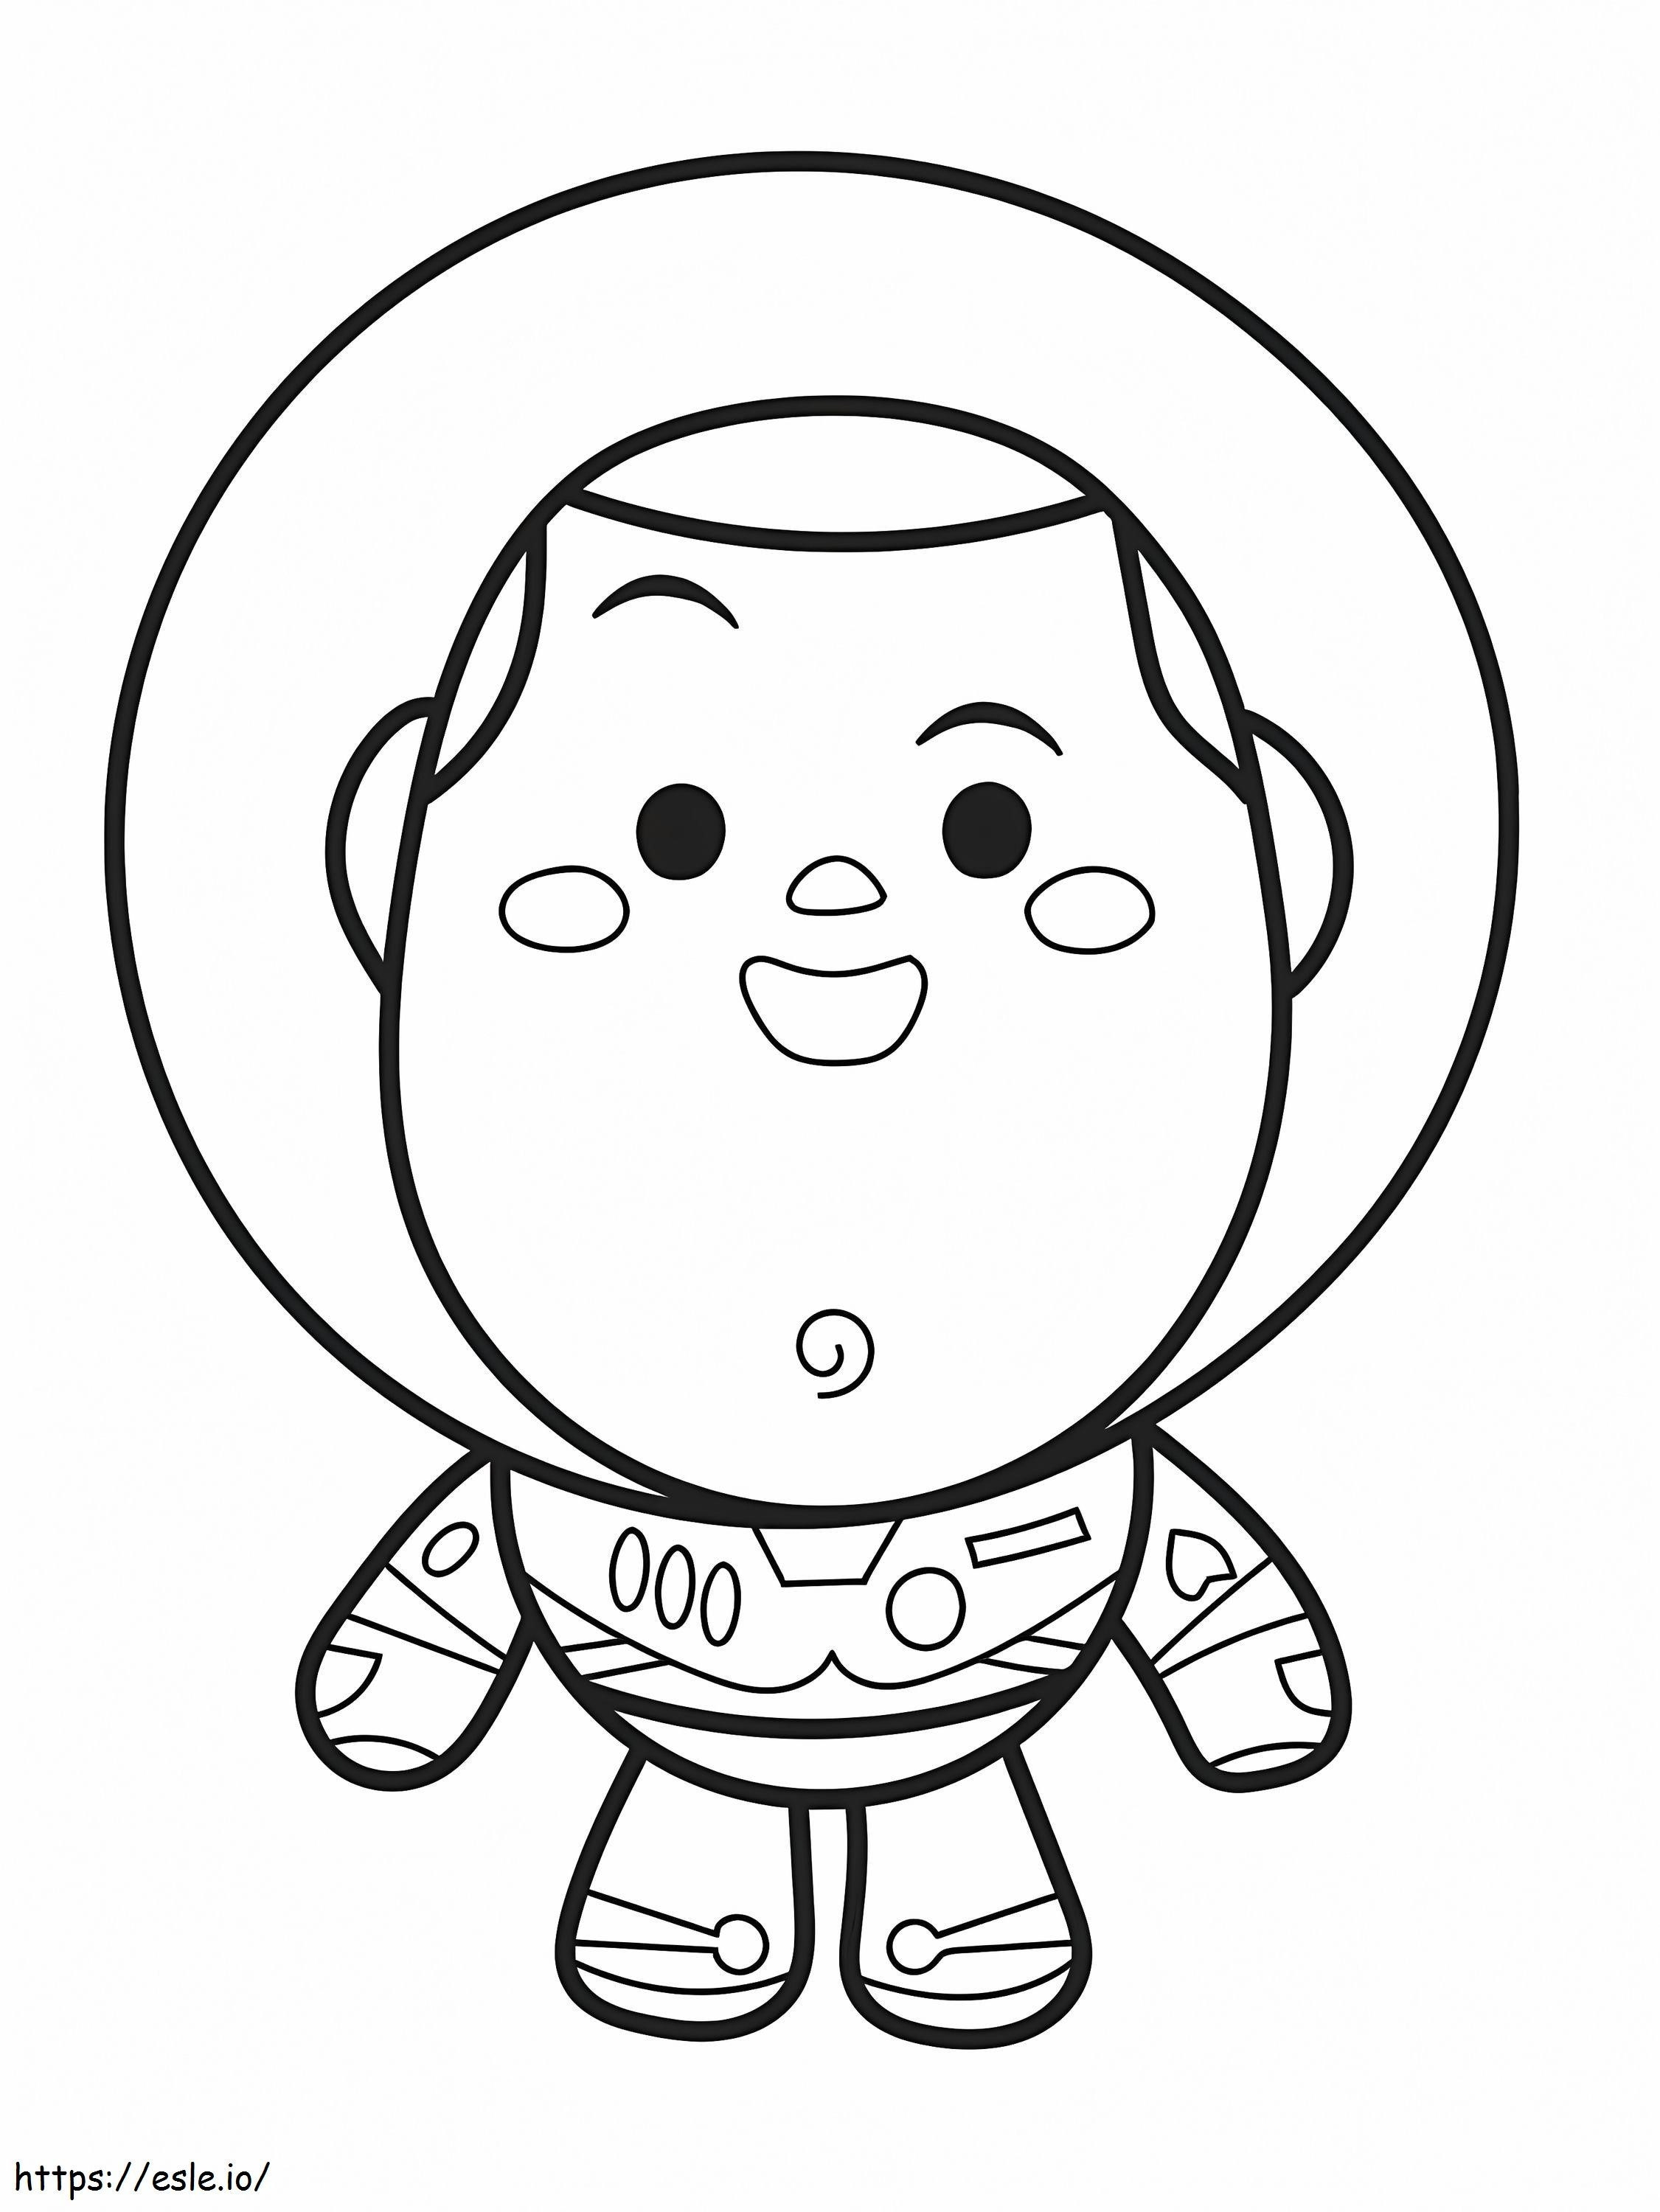 Cute Lightyear coloring page